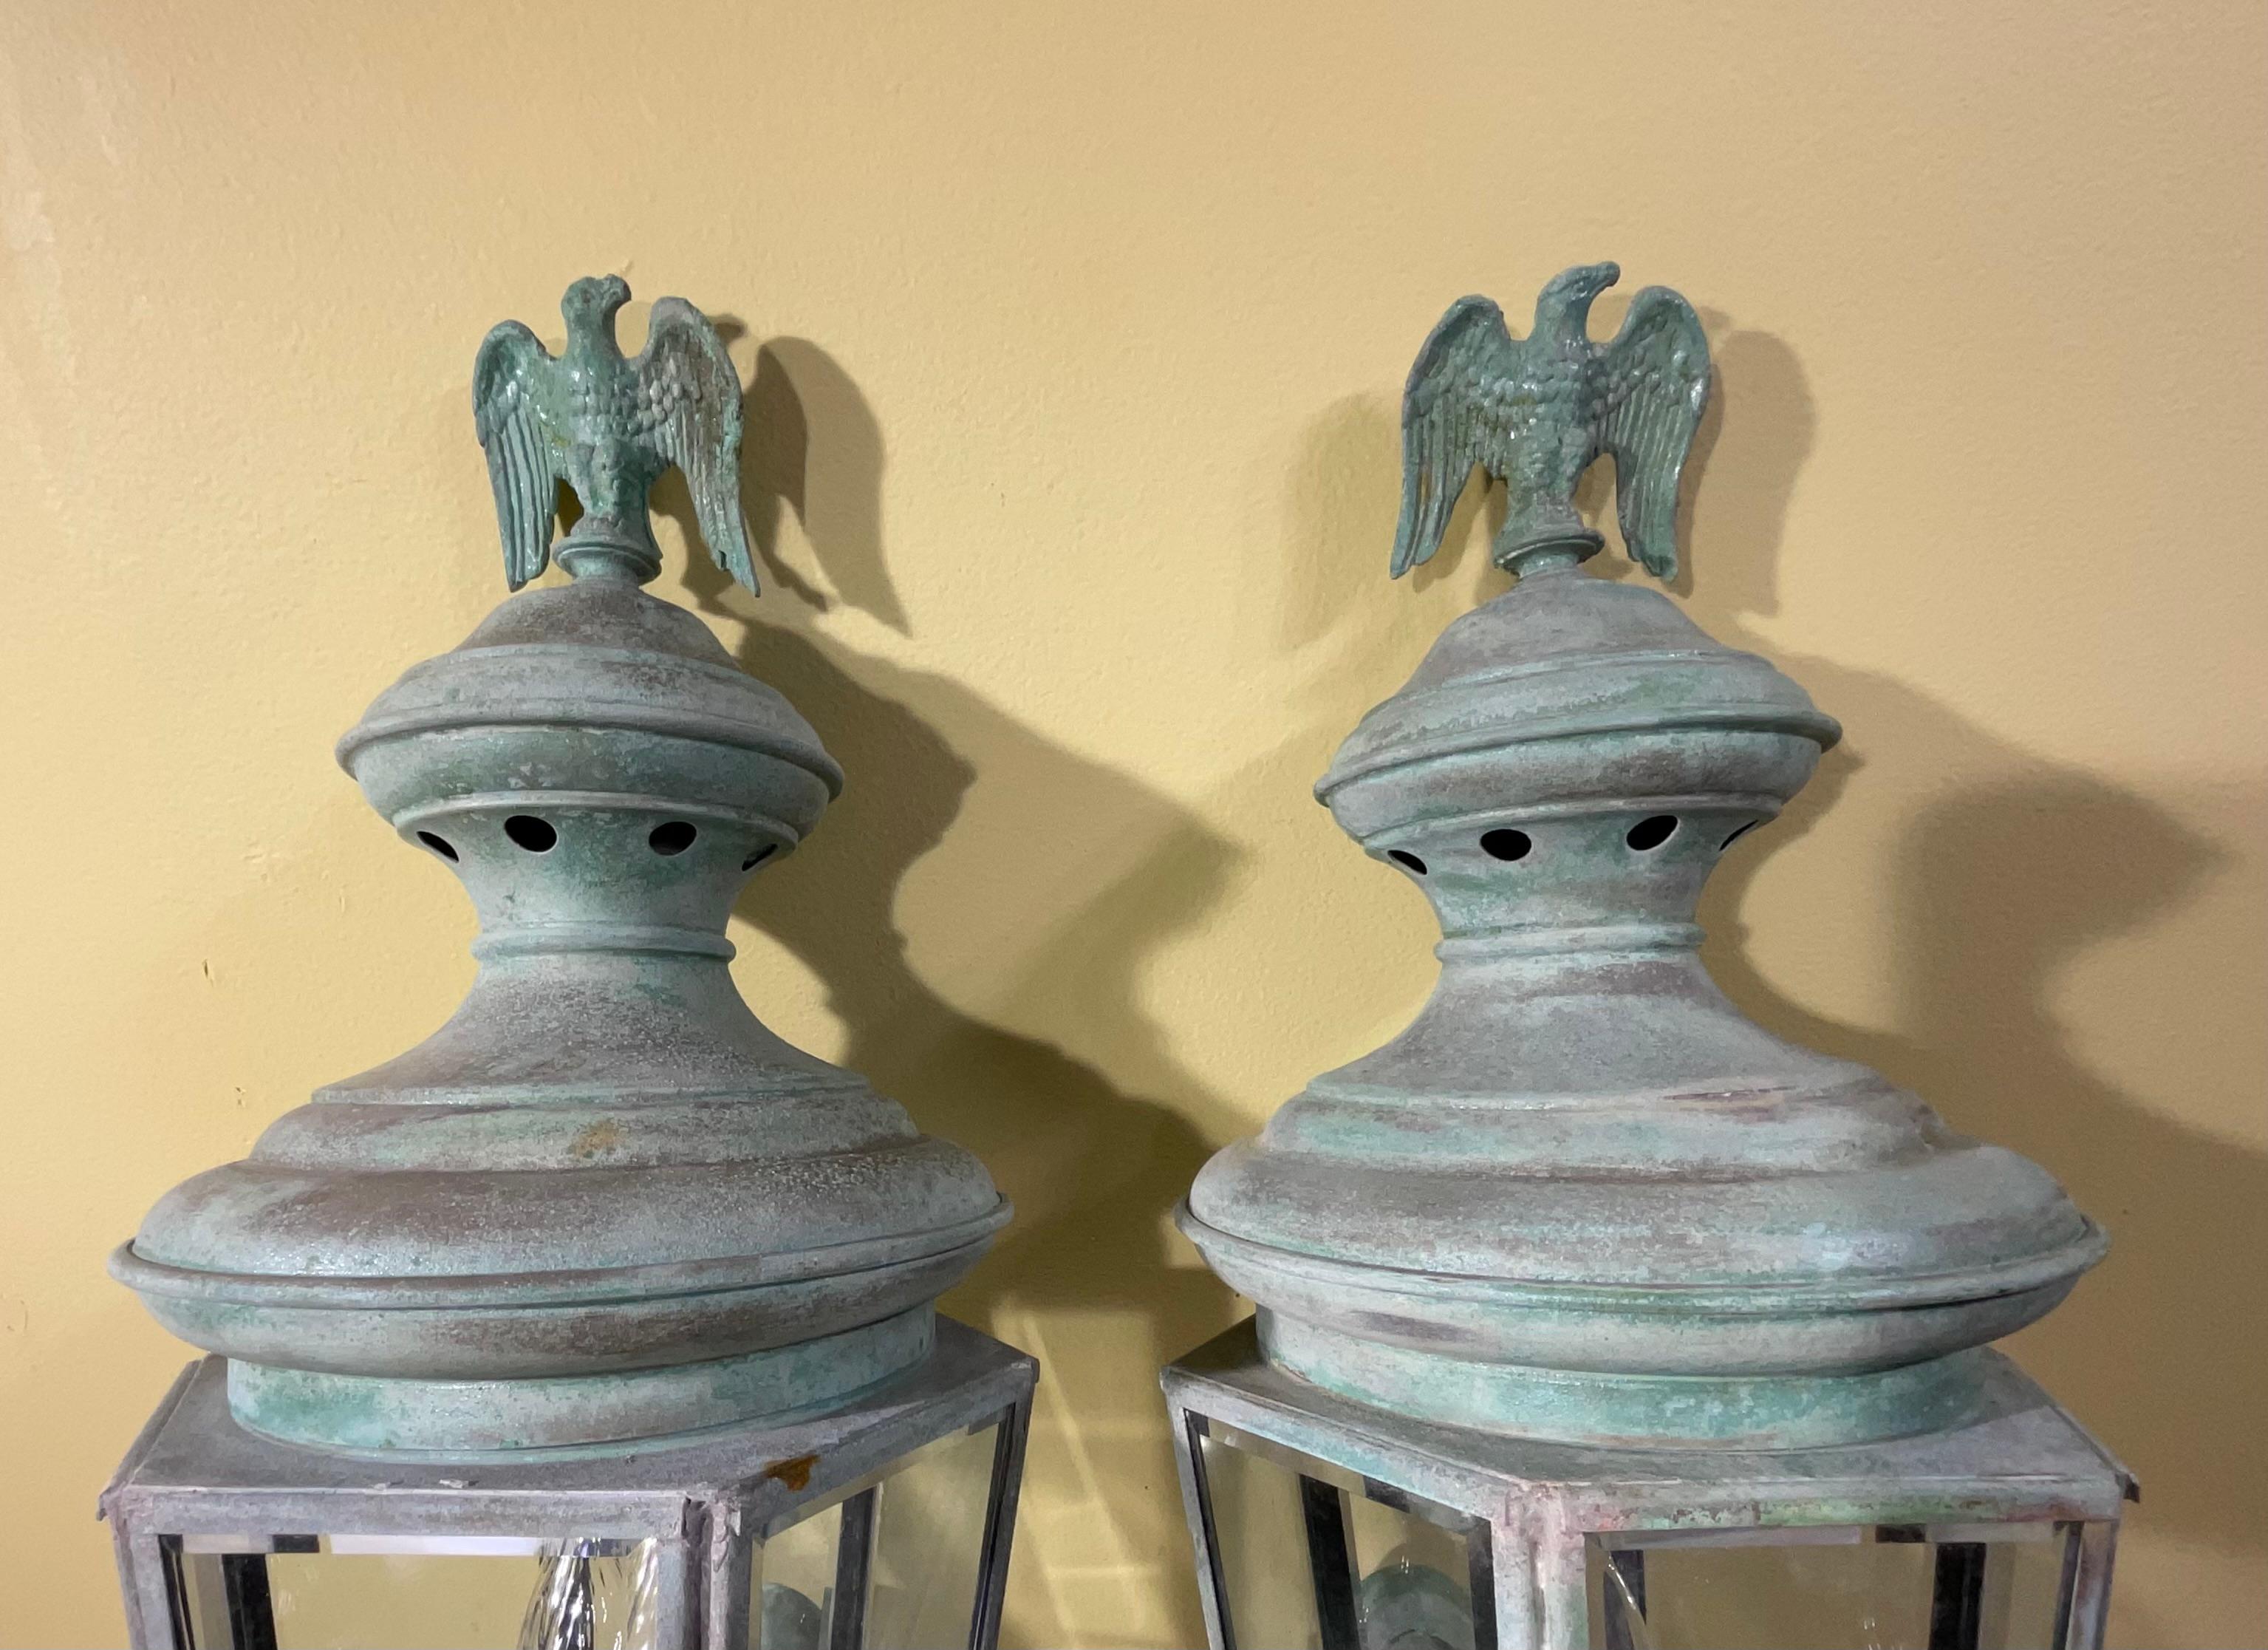 Pair of Vintage Brass Wall Lantern For Sale 2